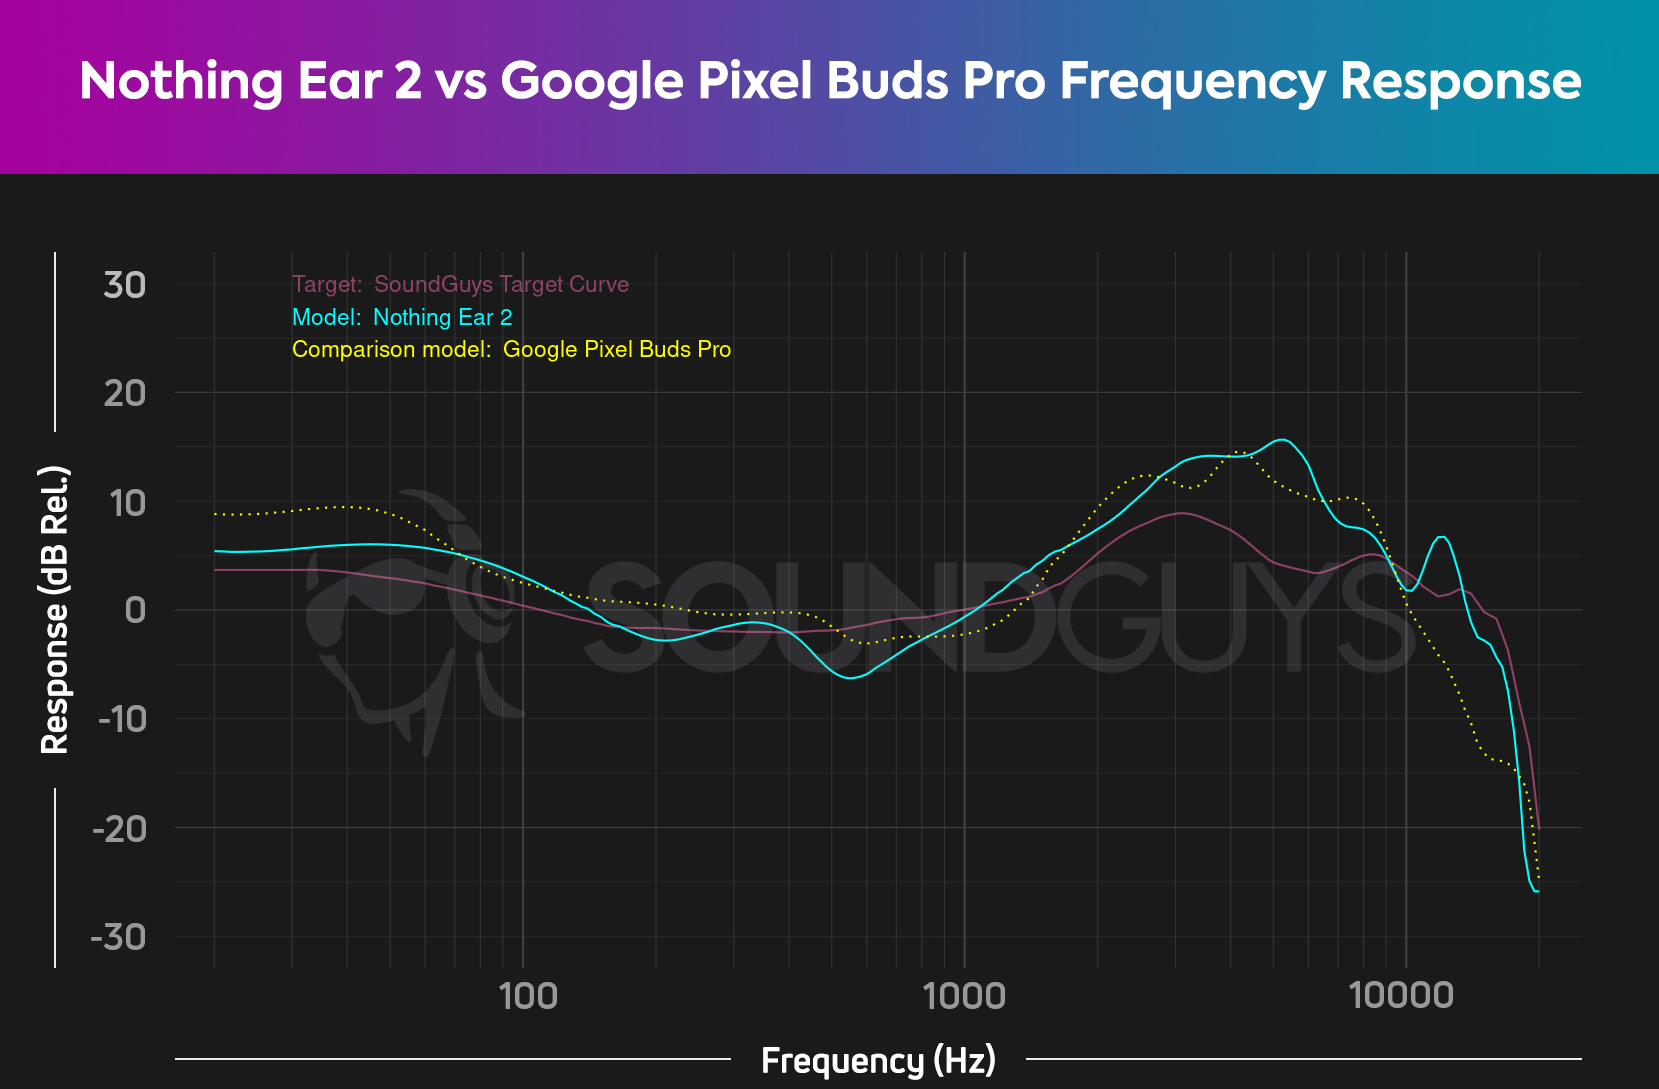 A frequency response chart compares the Nothing Ear 2 to the Google Pixel Buds Pro and the target curve.